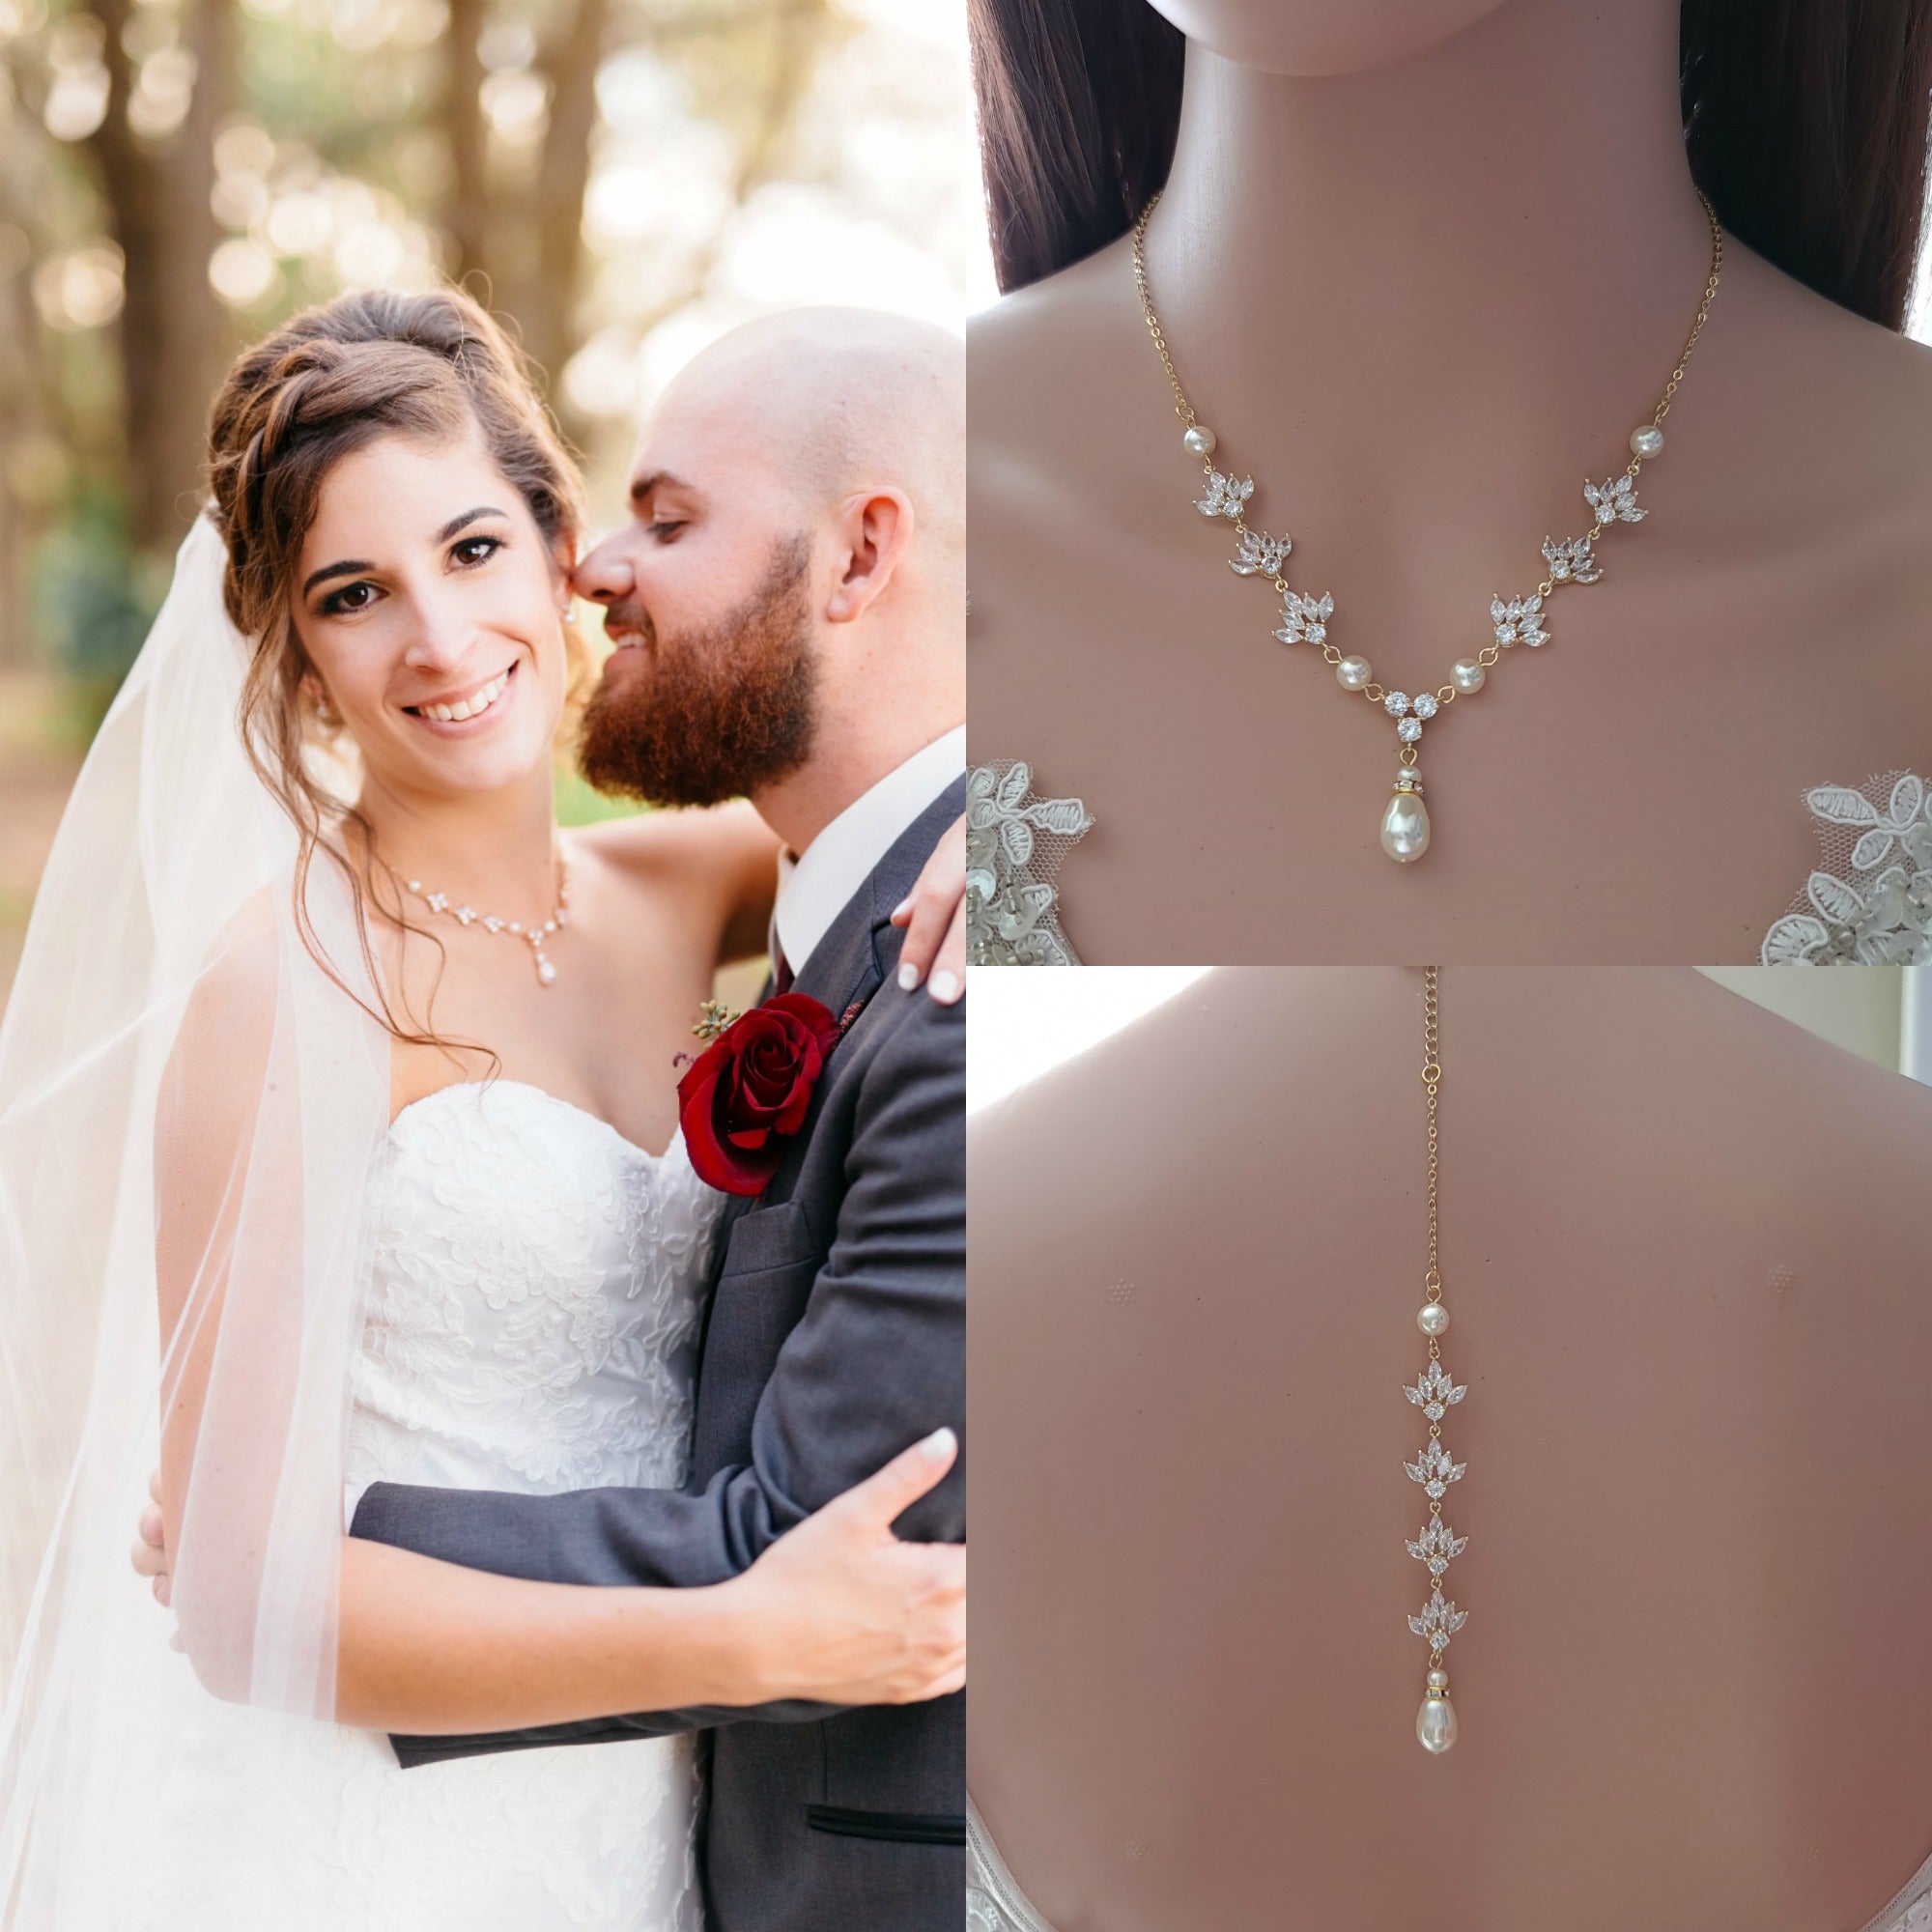 Back Jewelry for Wedding Dress | Pearl | Two Be Wed Jewelry